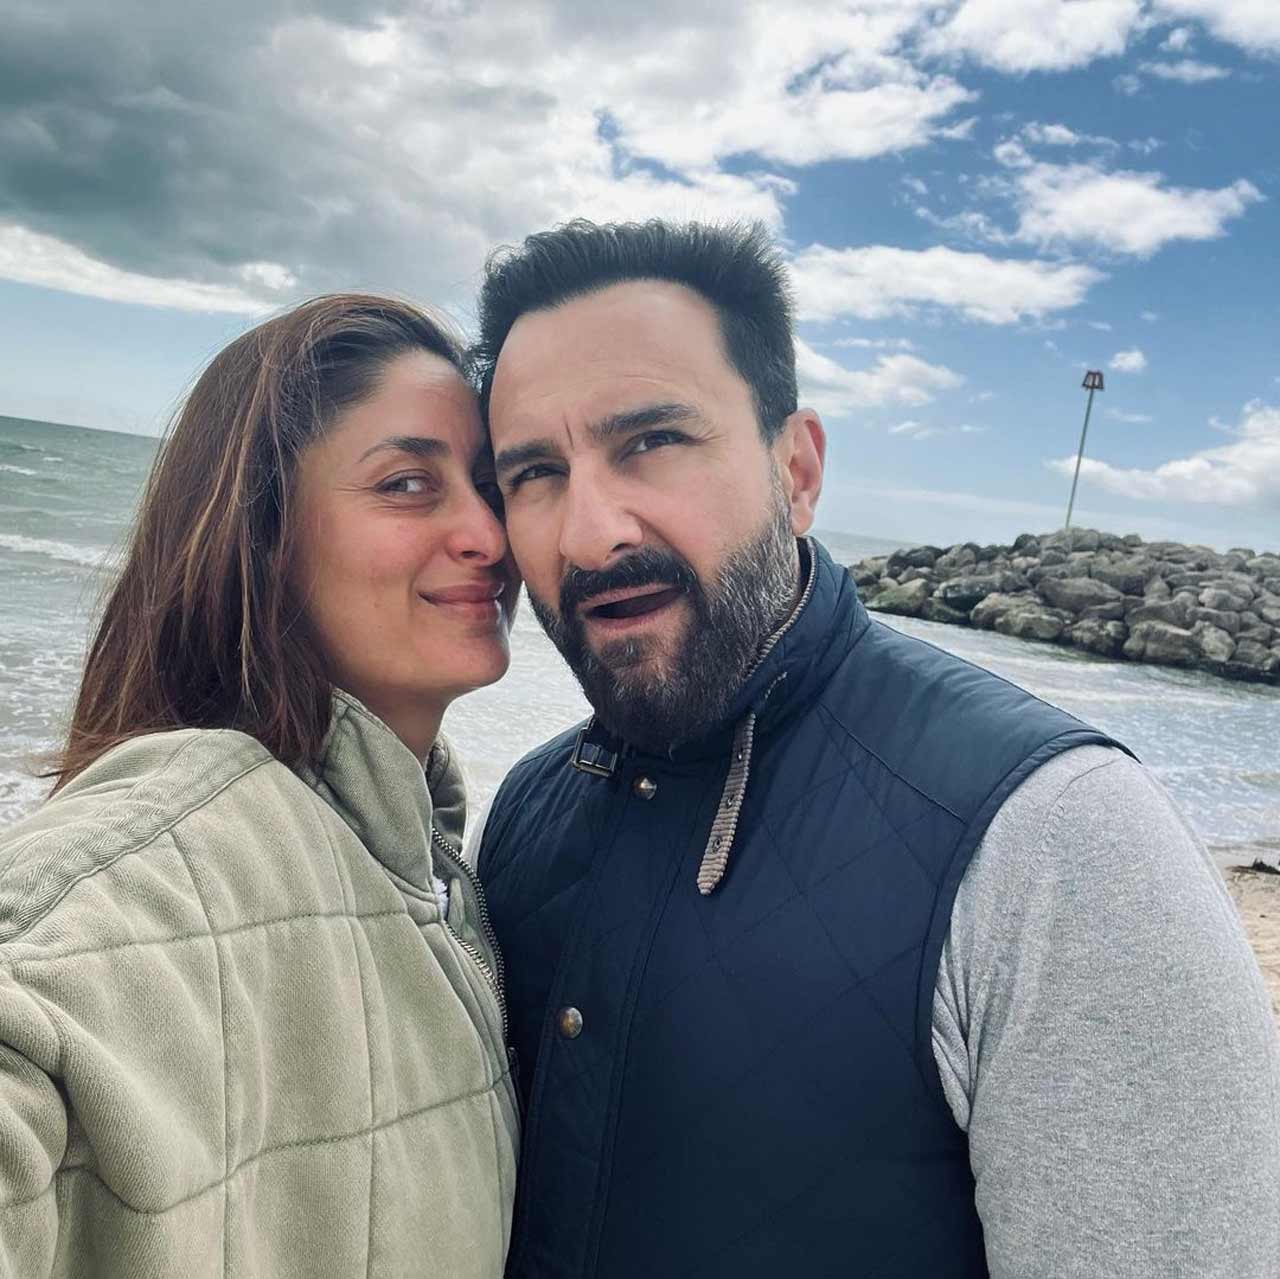 As Kareena Kapoor Khan turned away from the camera, Saif Alia Khan appeared to yawn. Meanwhile, on the work front, the 'Tashan' actor will be next seen in 'Laal Singh Chadha' opposite Aamir Khan. The film is slated to release on August 11, 2022. Apart from that, she will be making her digital debut with director Sujoy Ghosh's next film based on the bestselling novel 'The Devotion of Suspect X' opposite actor Jaideep Ahlawat and Vijay Verma. The film will stream exclusively on Netflix